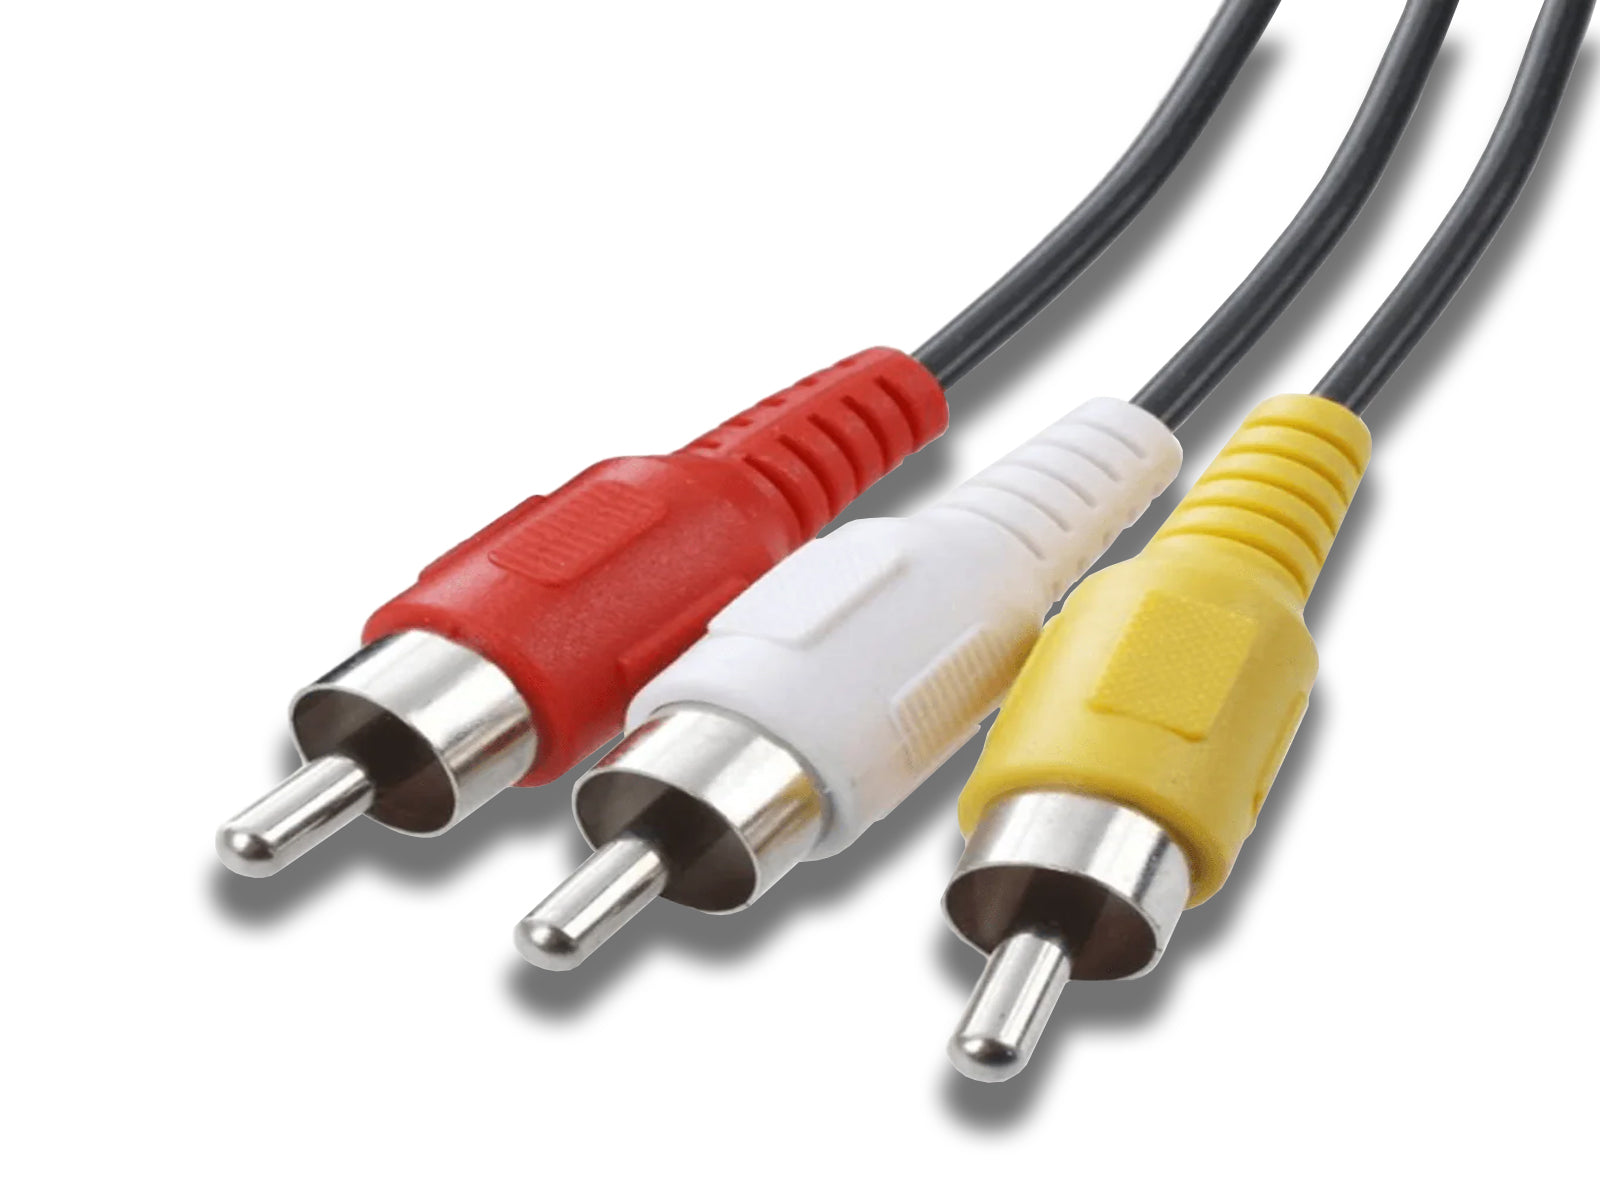 RCA Audio Cable White, Yellow & Red Close up Cables